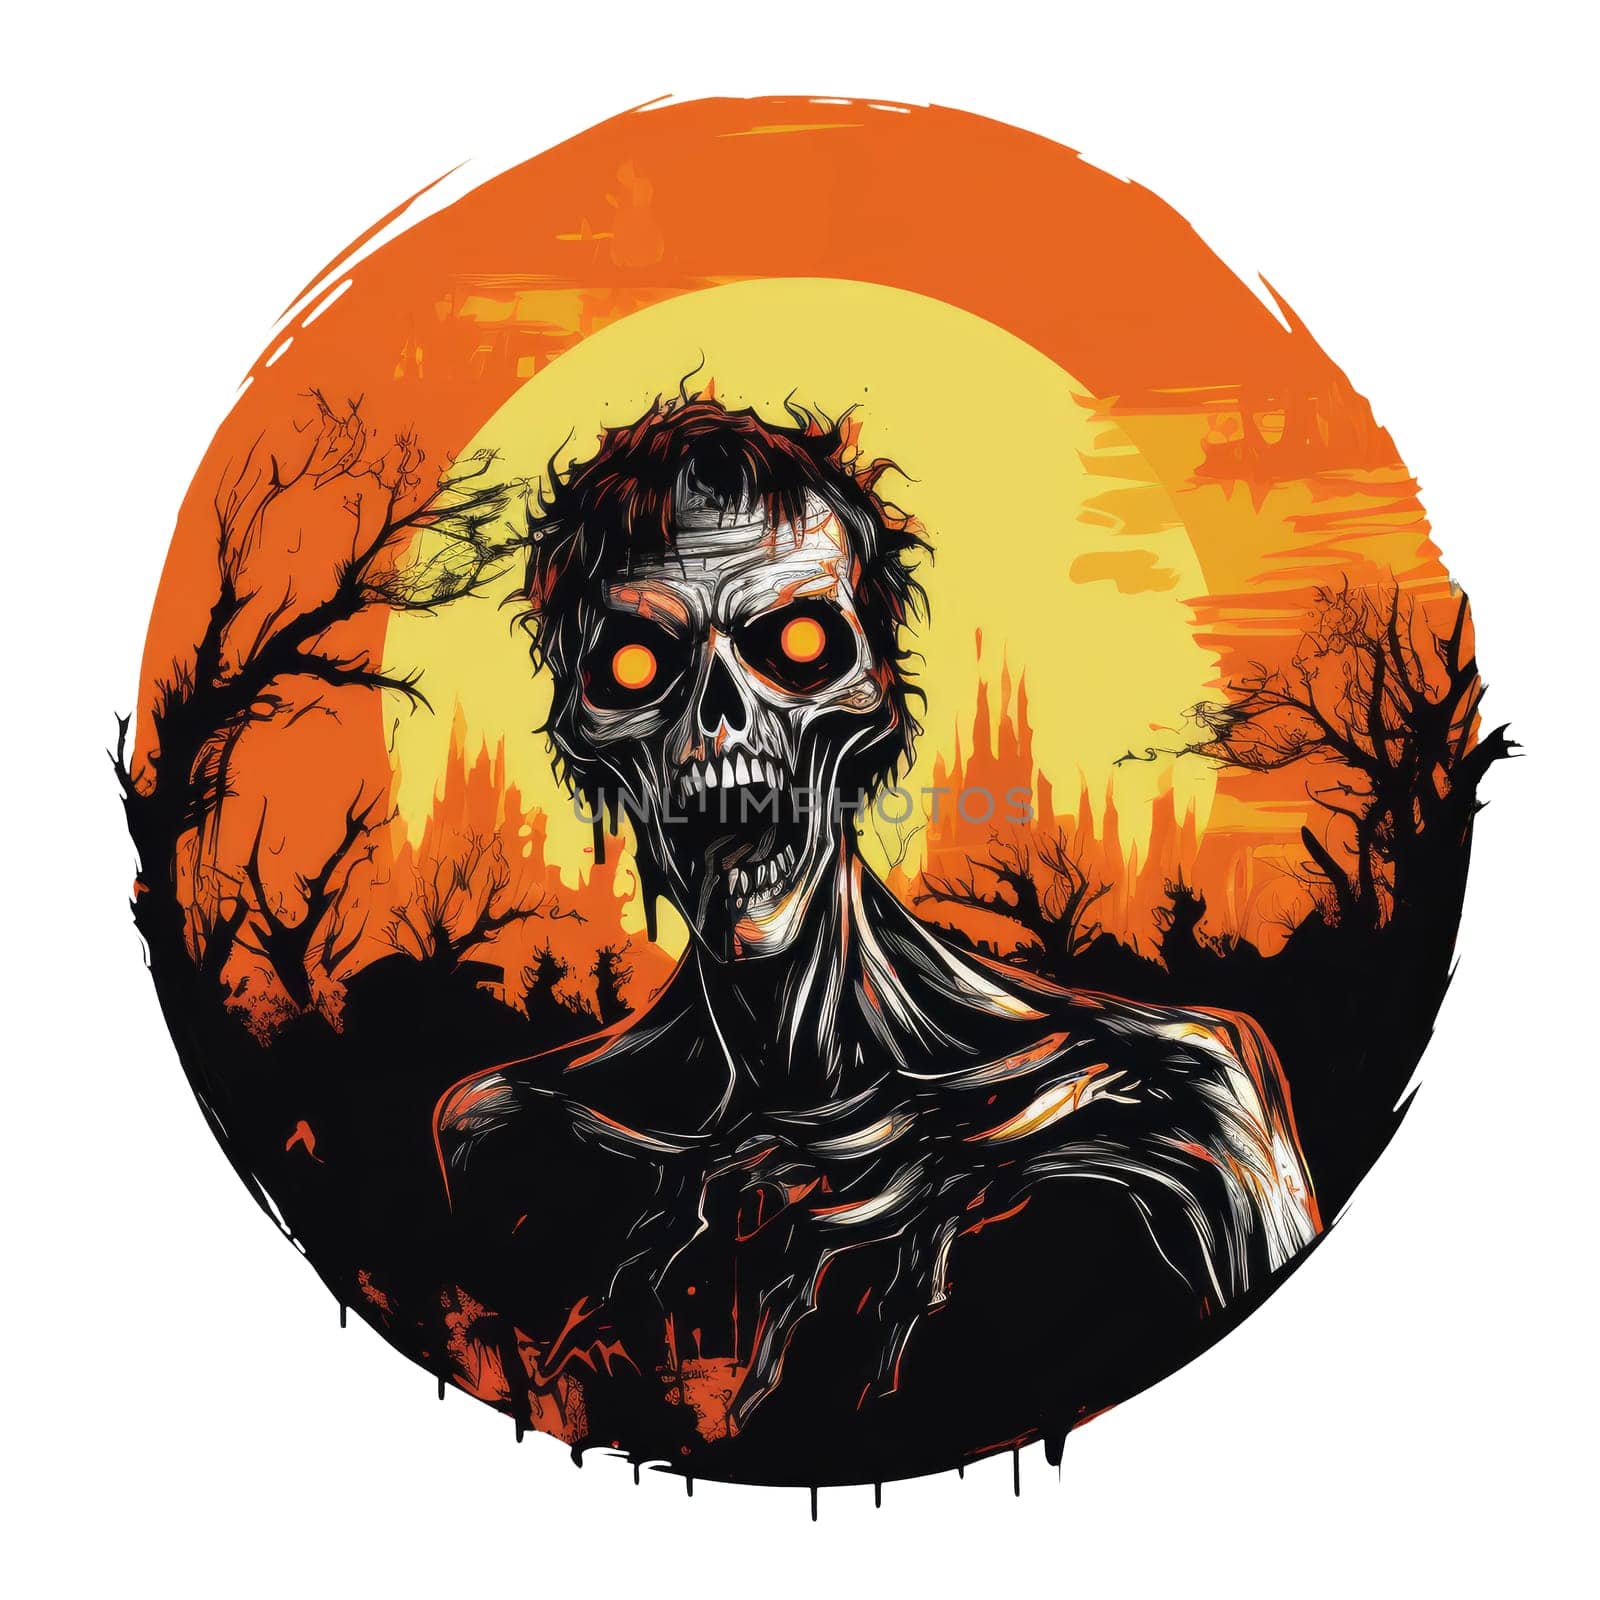 T-shirt or poster design with zombie Halloween theme on white by natali_brill